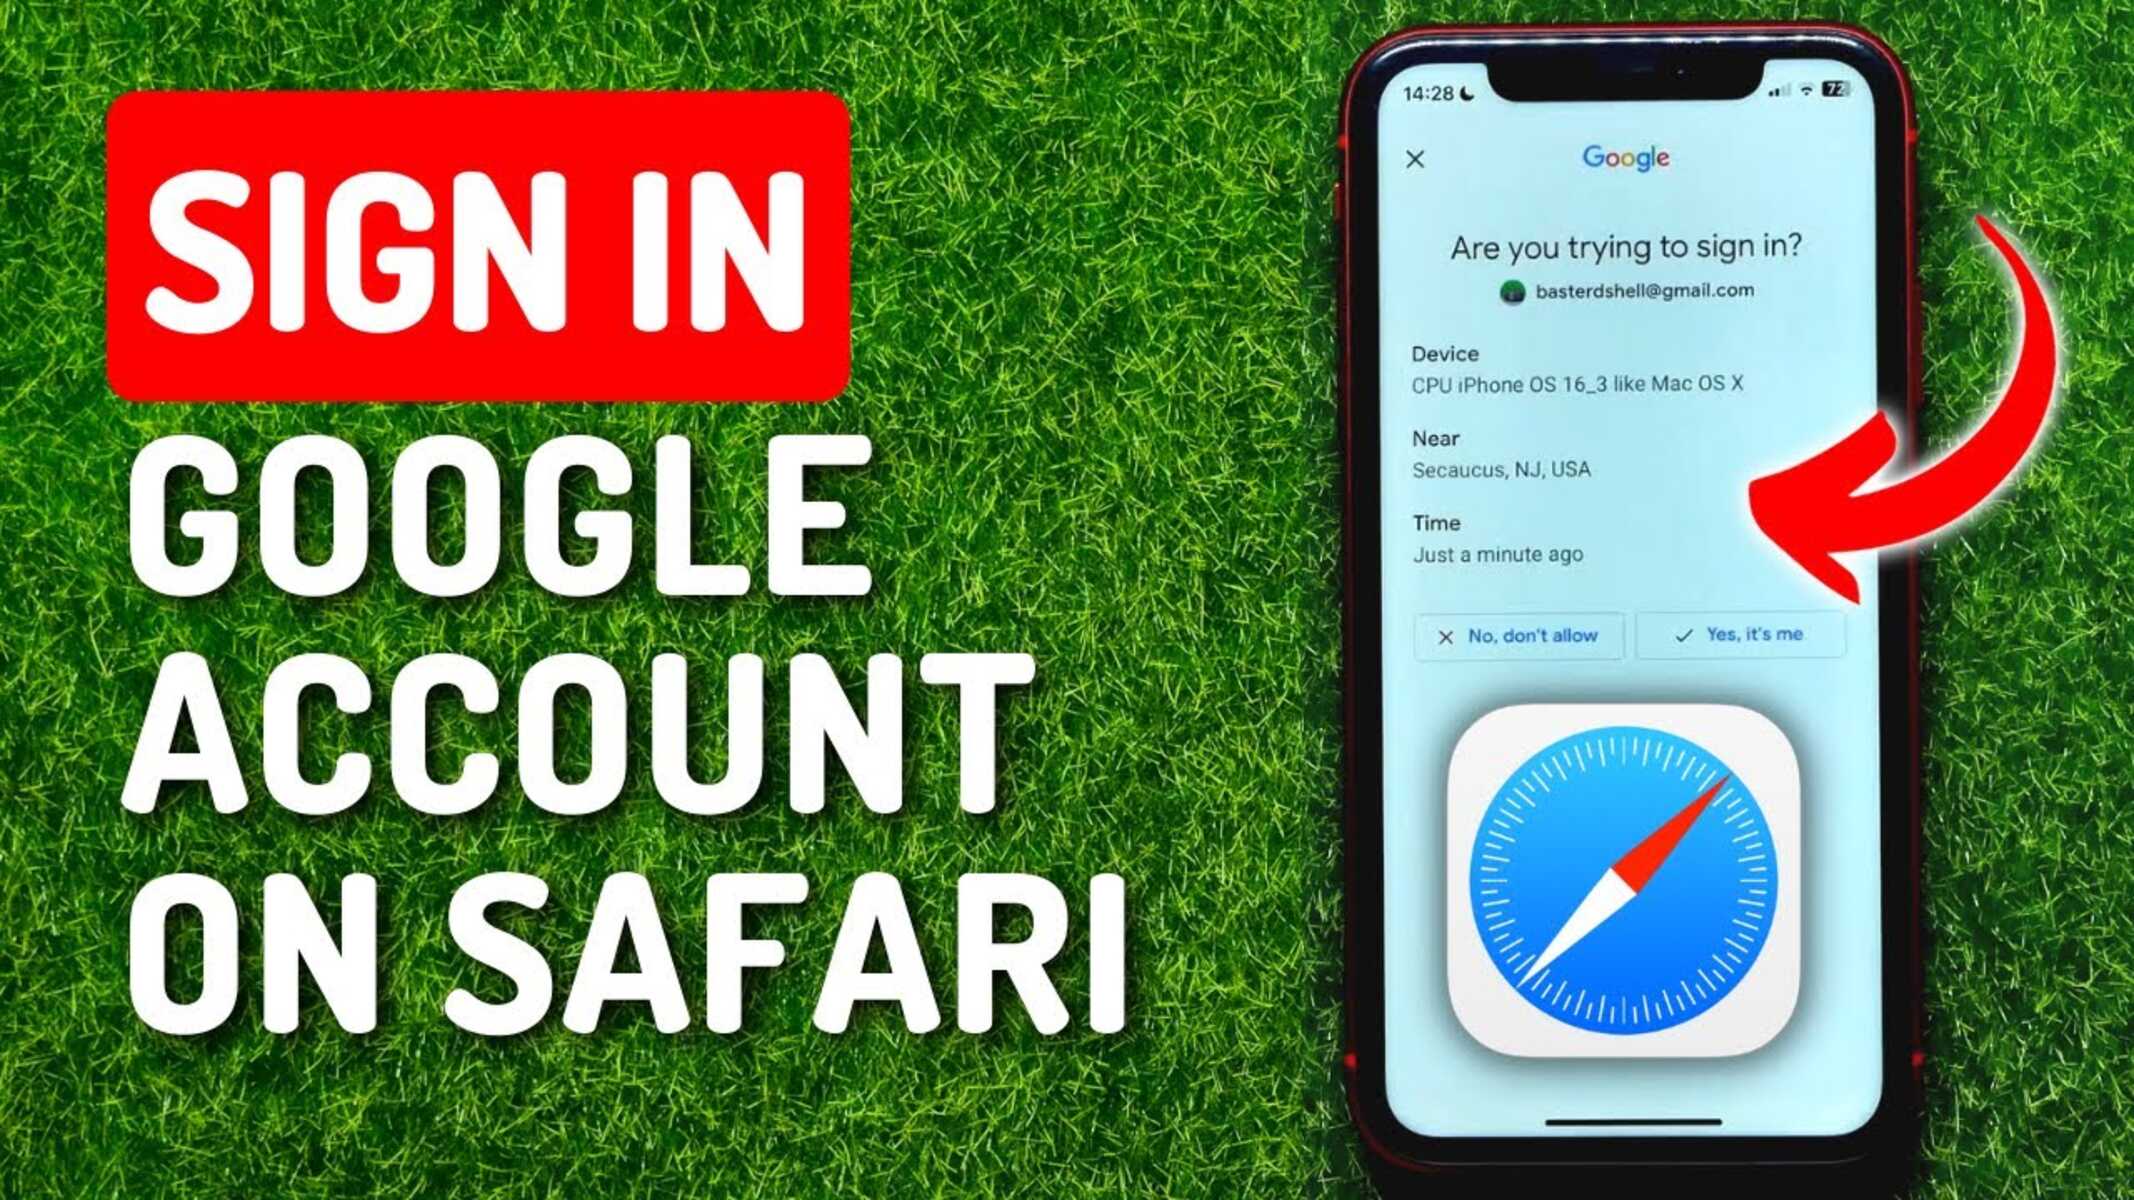 How To Stay Signed In To Google On Safari